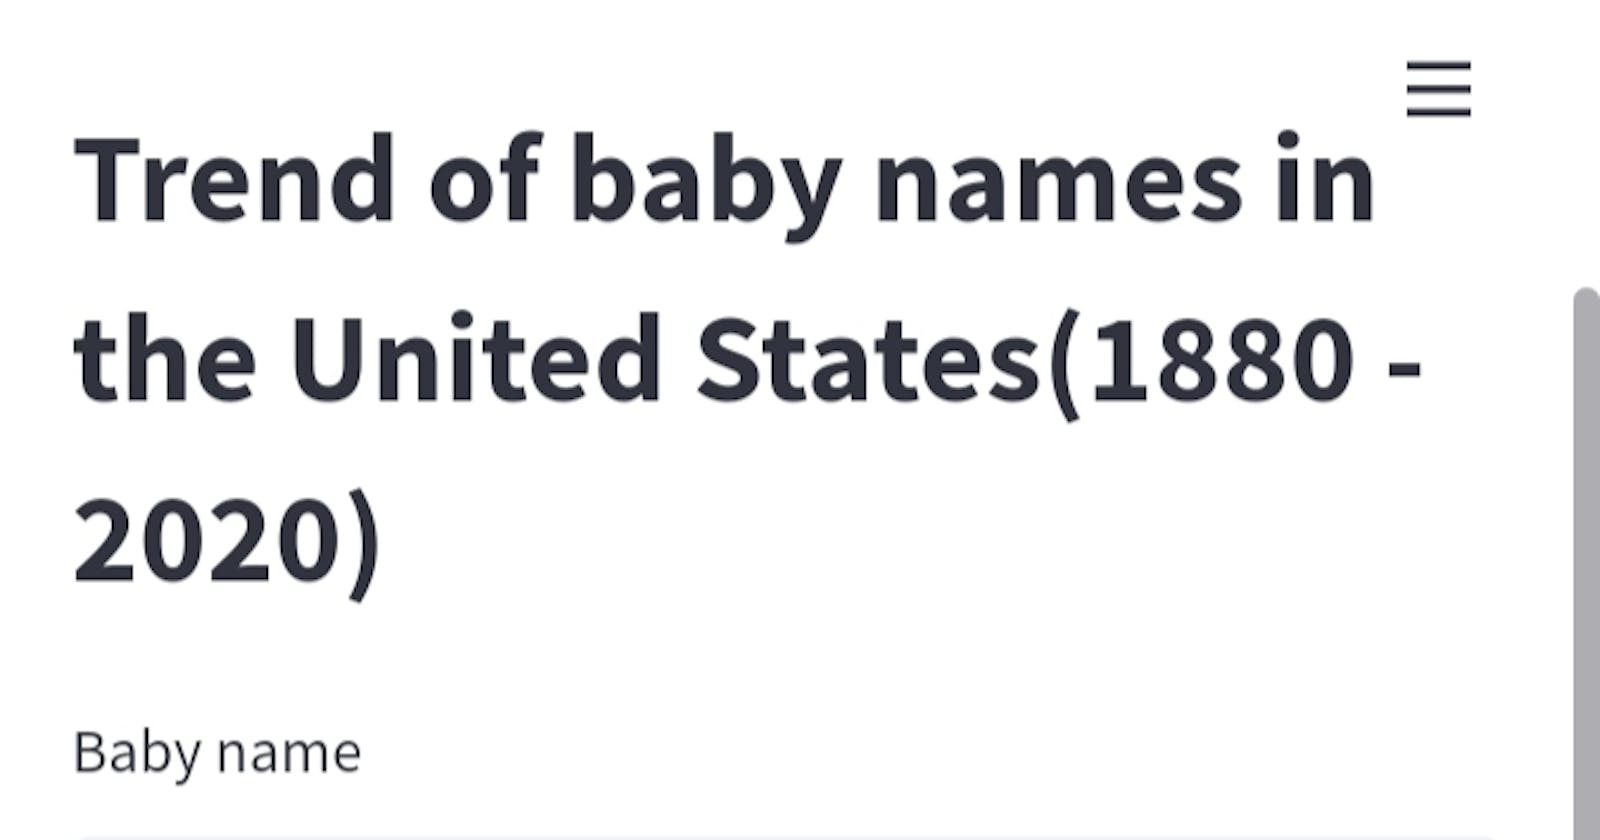 Analysing American Baby Name Trends with Python